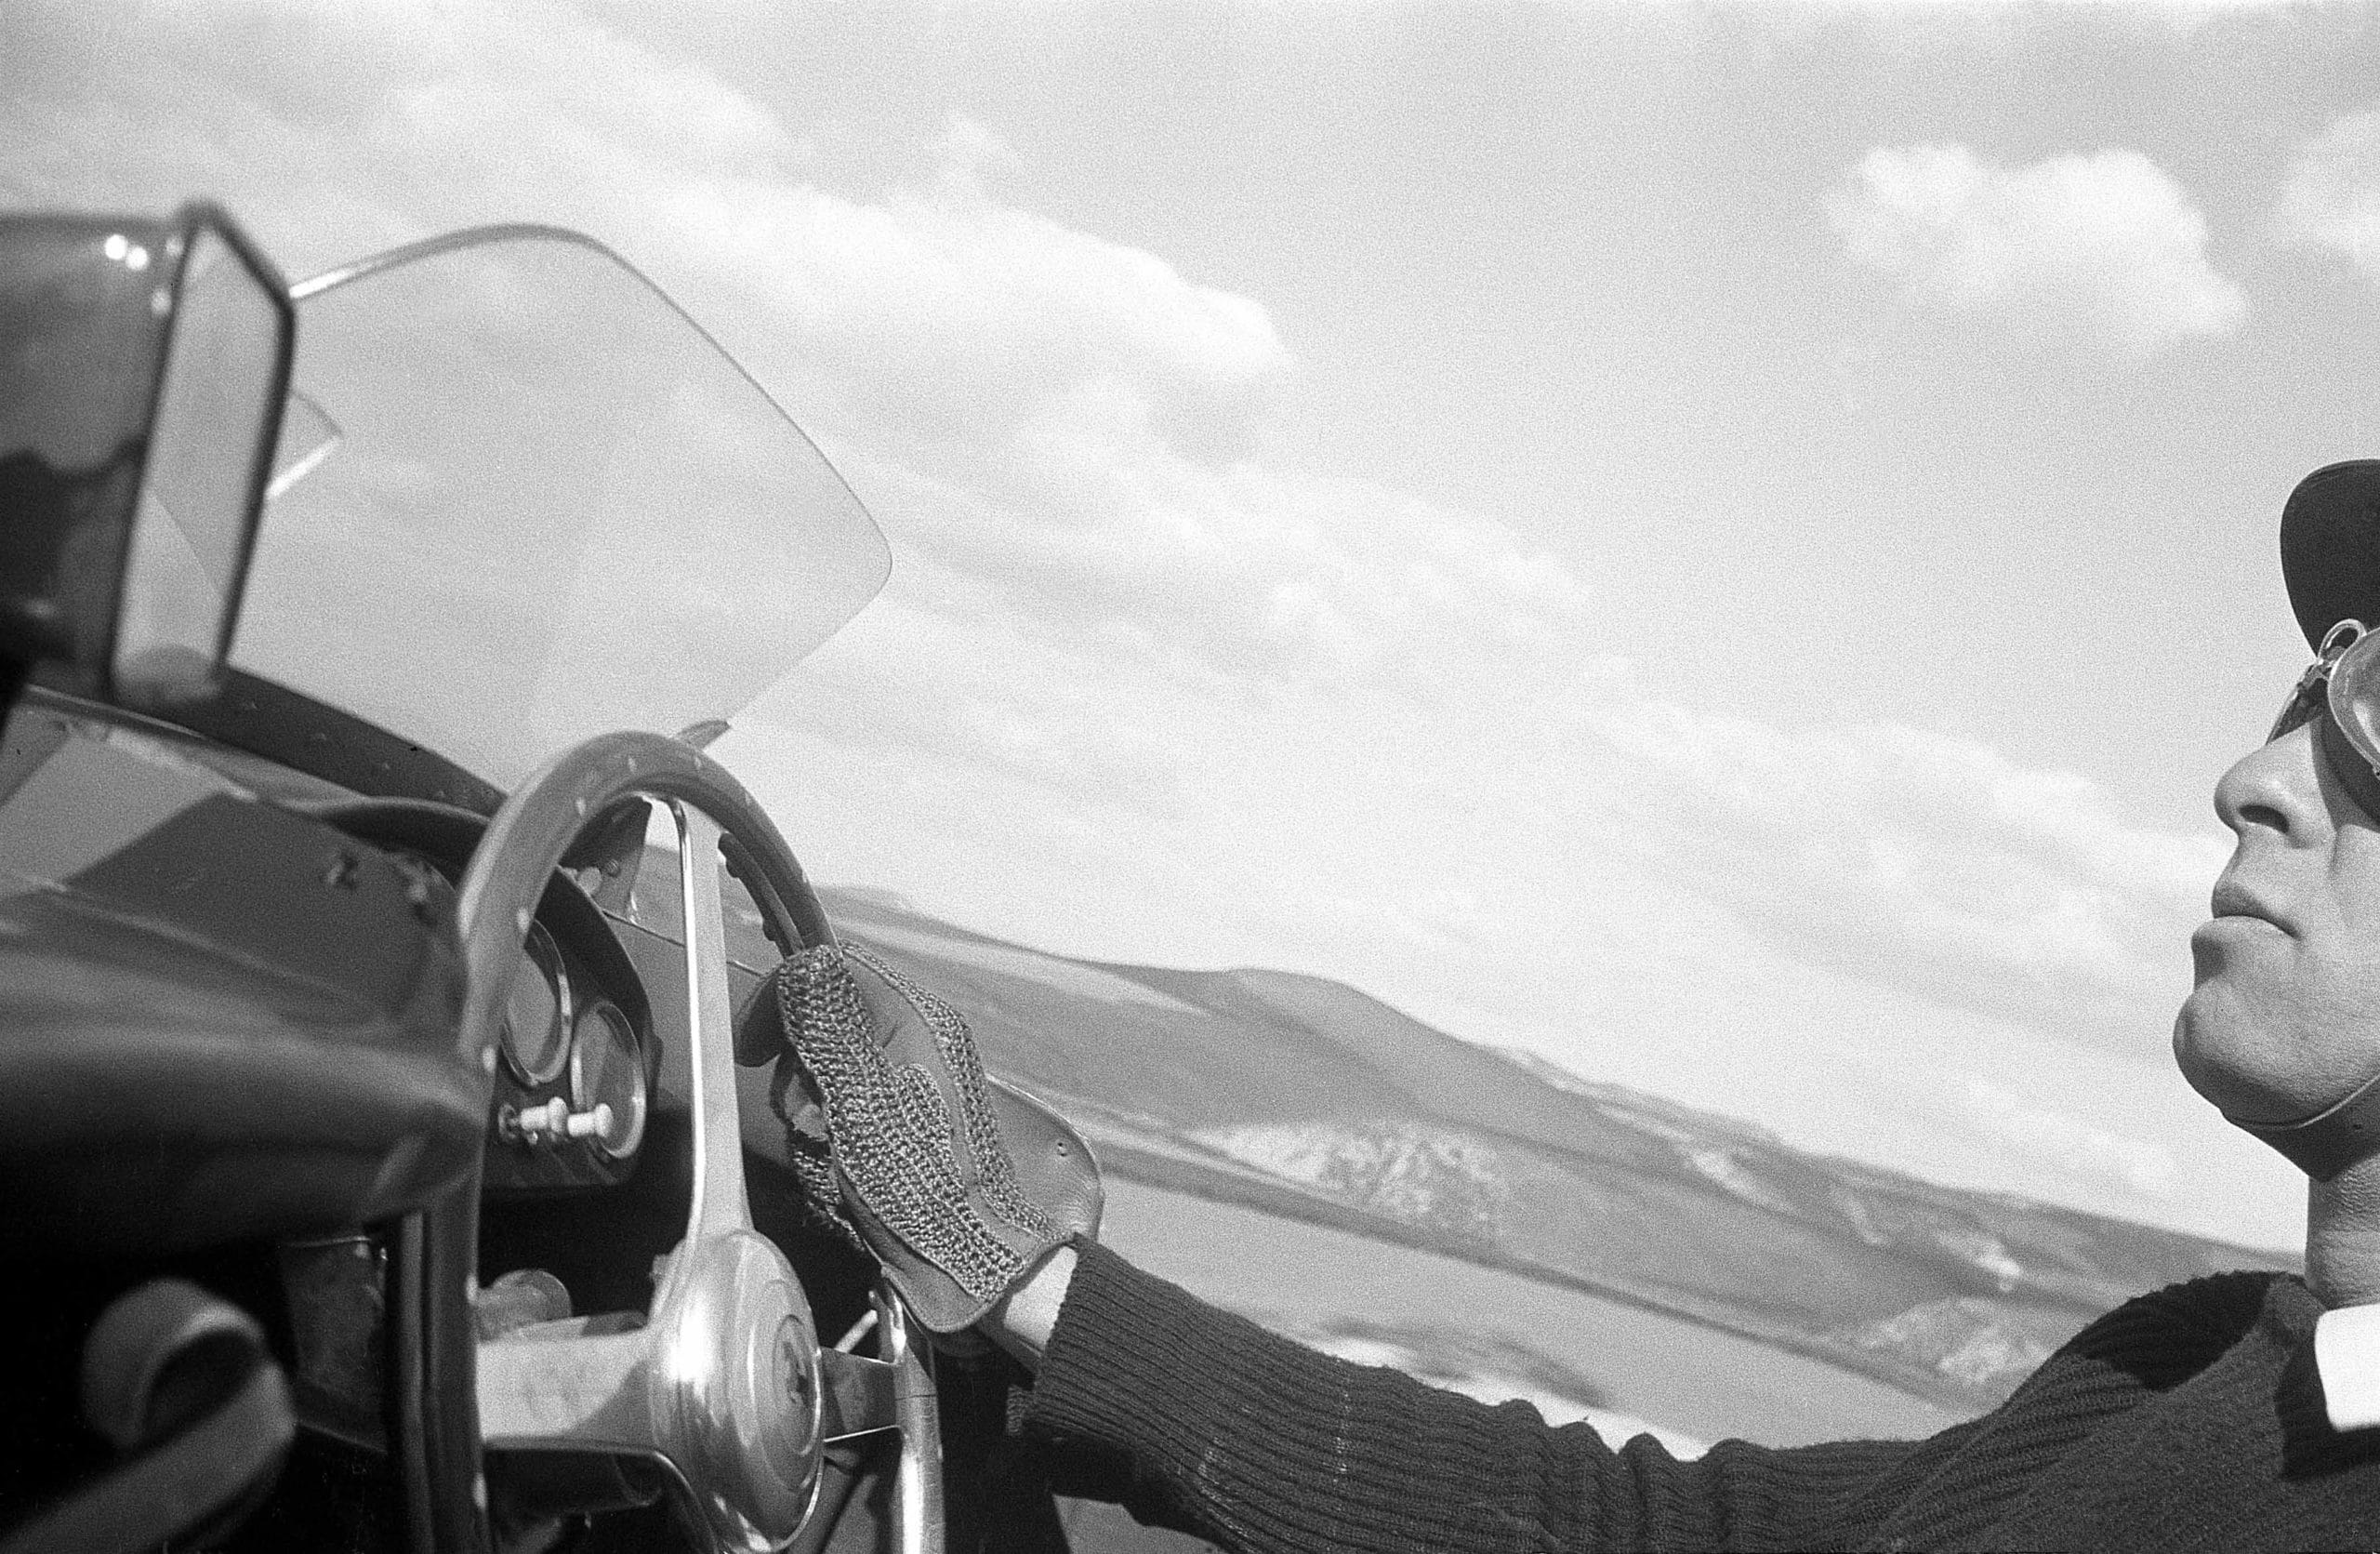 British racing driver Peter Collins at the wheel of the 3.5 litre Ferrari Monza Type 857S during the Giro di Sicilia, Sicily, which he won, 8th April 1956. (Photo by Klemantaski Collection/Getty Images)